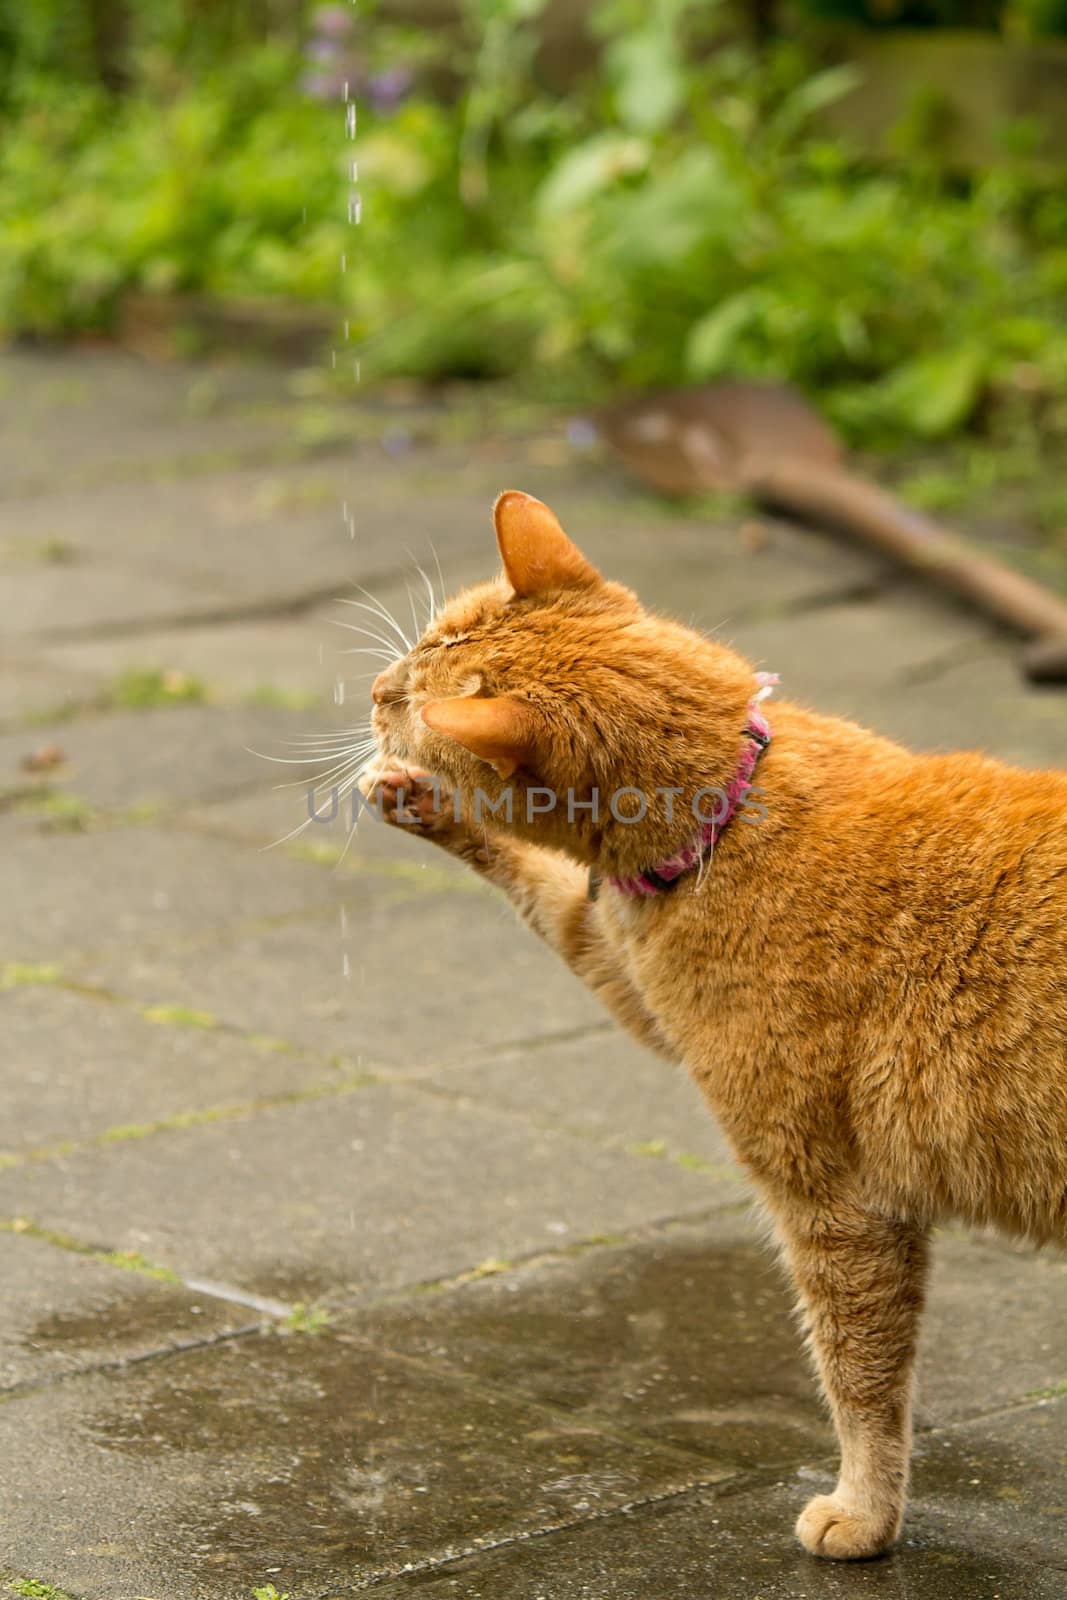 Orange cat plays with water droplets in a garden